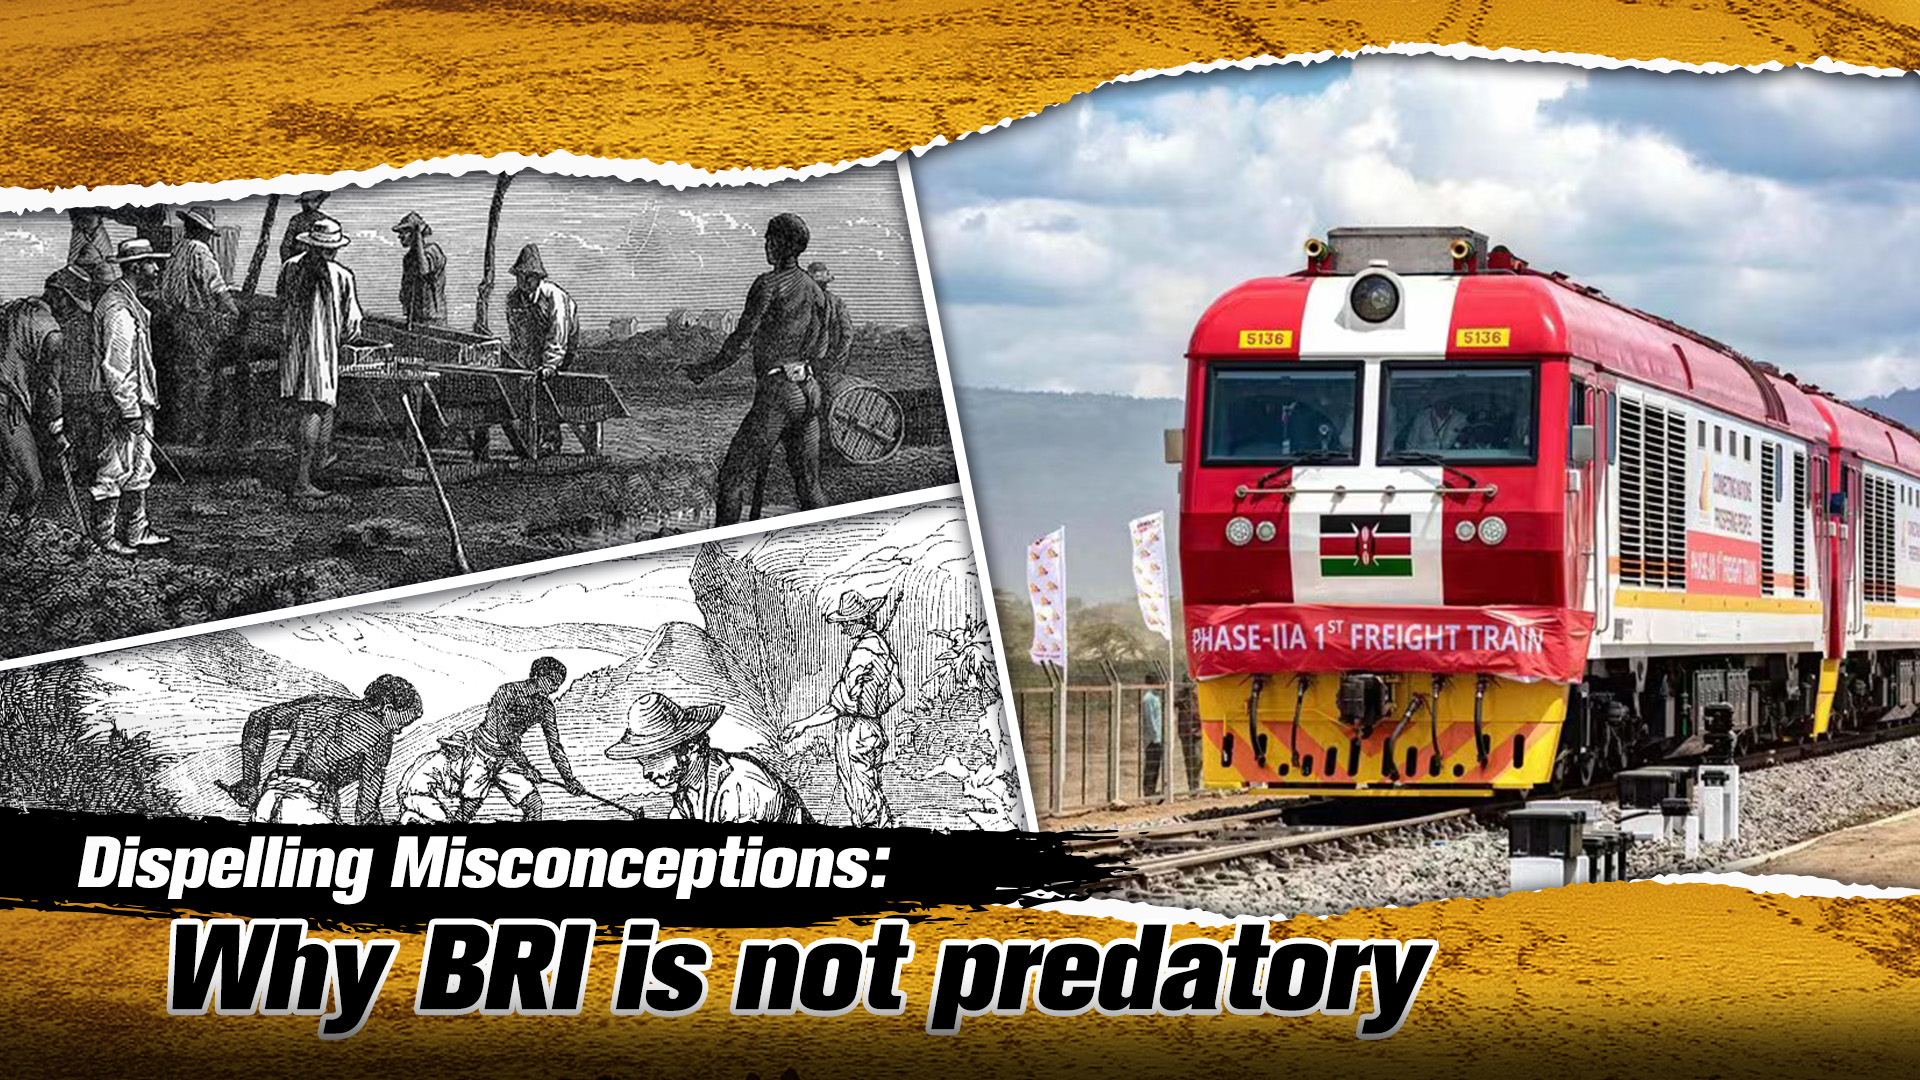 Dispelling Misconceptions: Why BRI is not predatory